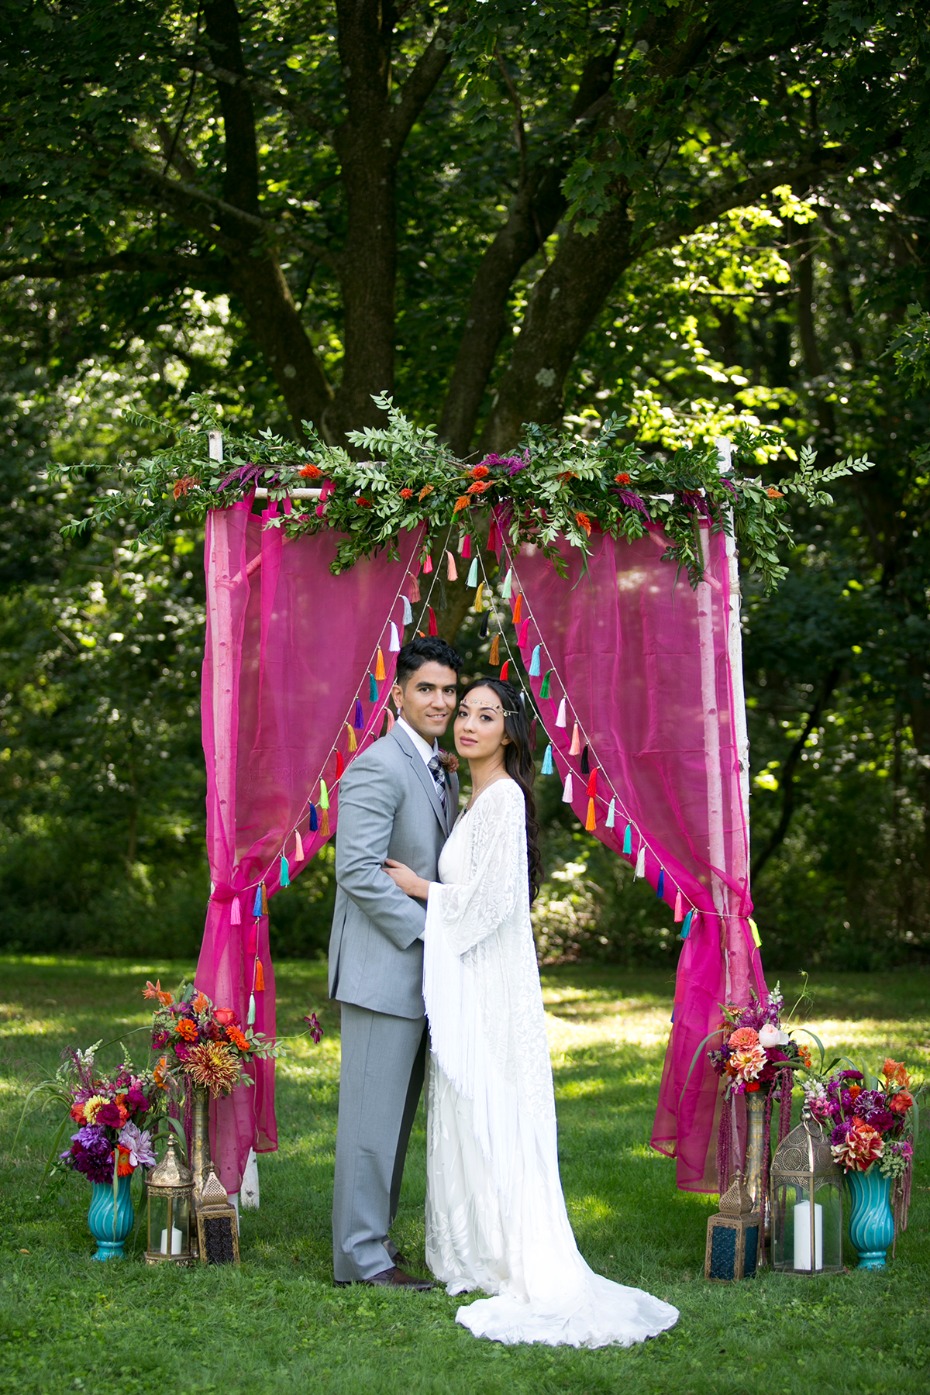 whimsical wedding style with bright colors